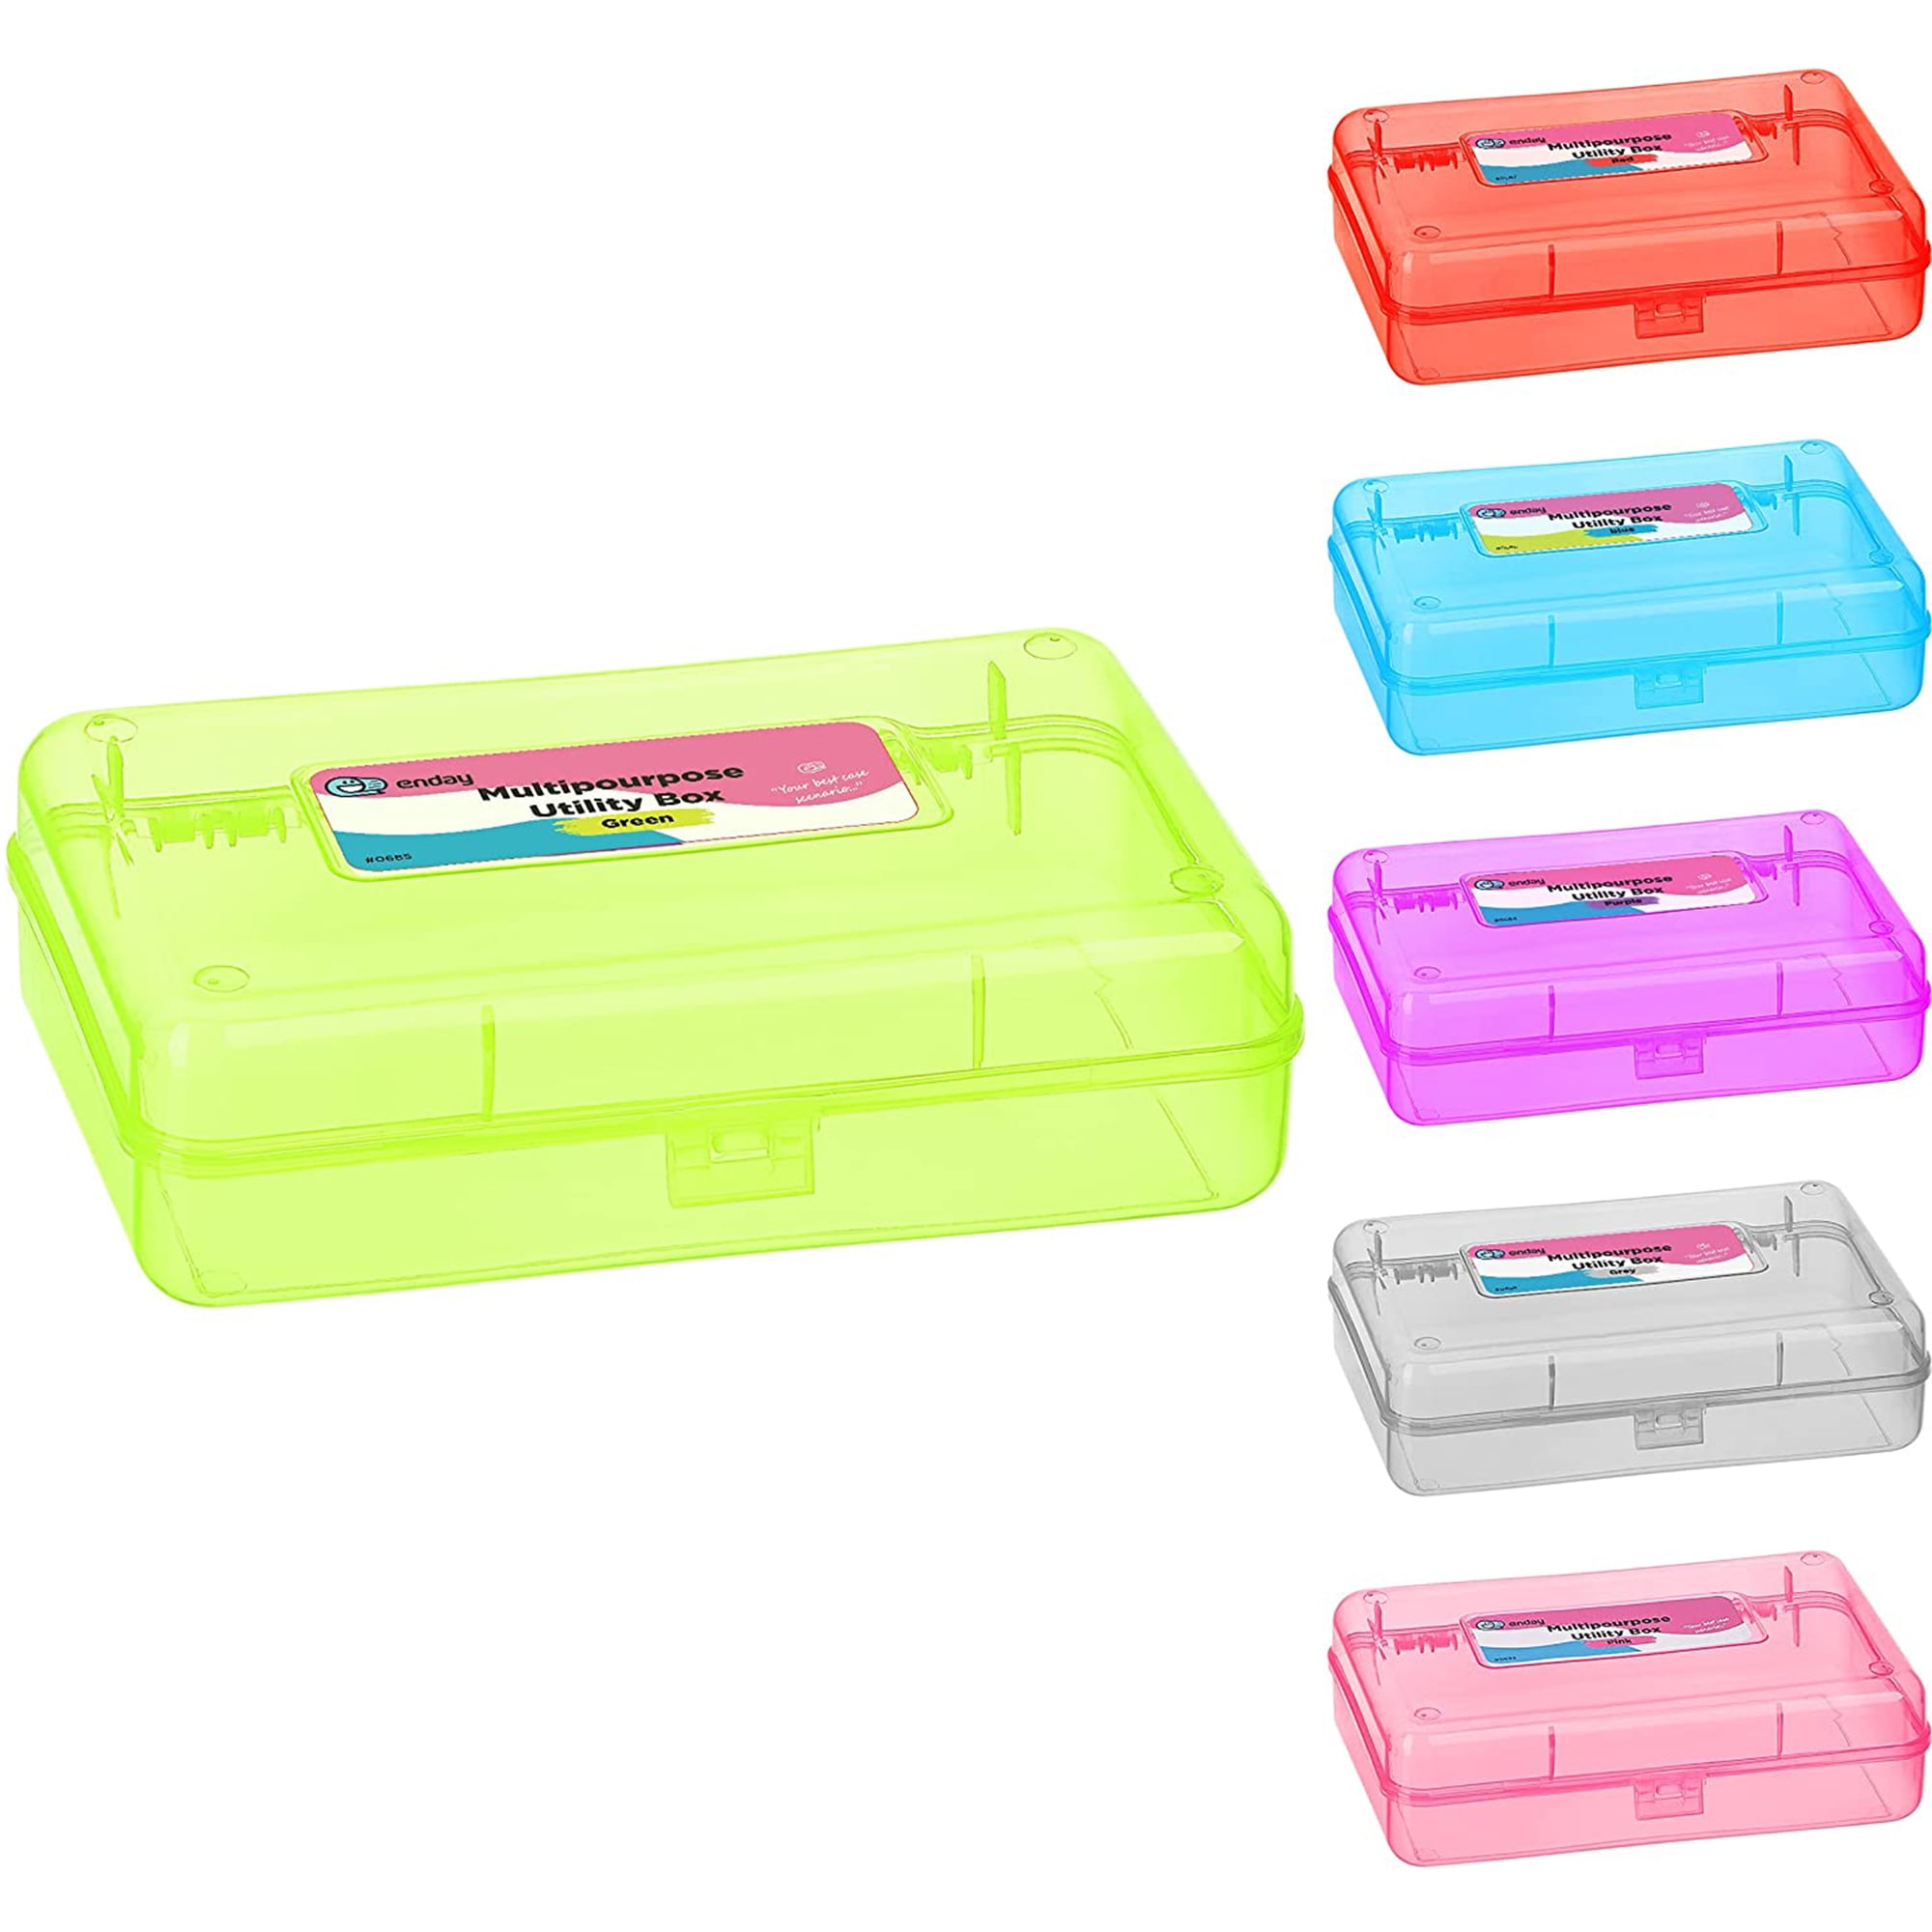 Enday Crayon Box Storage Containers, Clear Crayon Case, Plastic Crayon Boxes for Kids, Cards Small Supplies Organizers Boxes, Snap Closure, 4 Pack